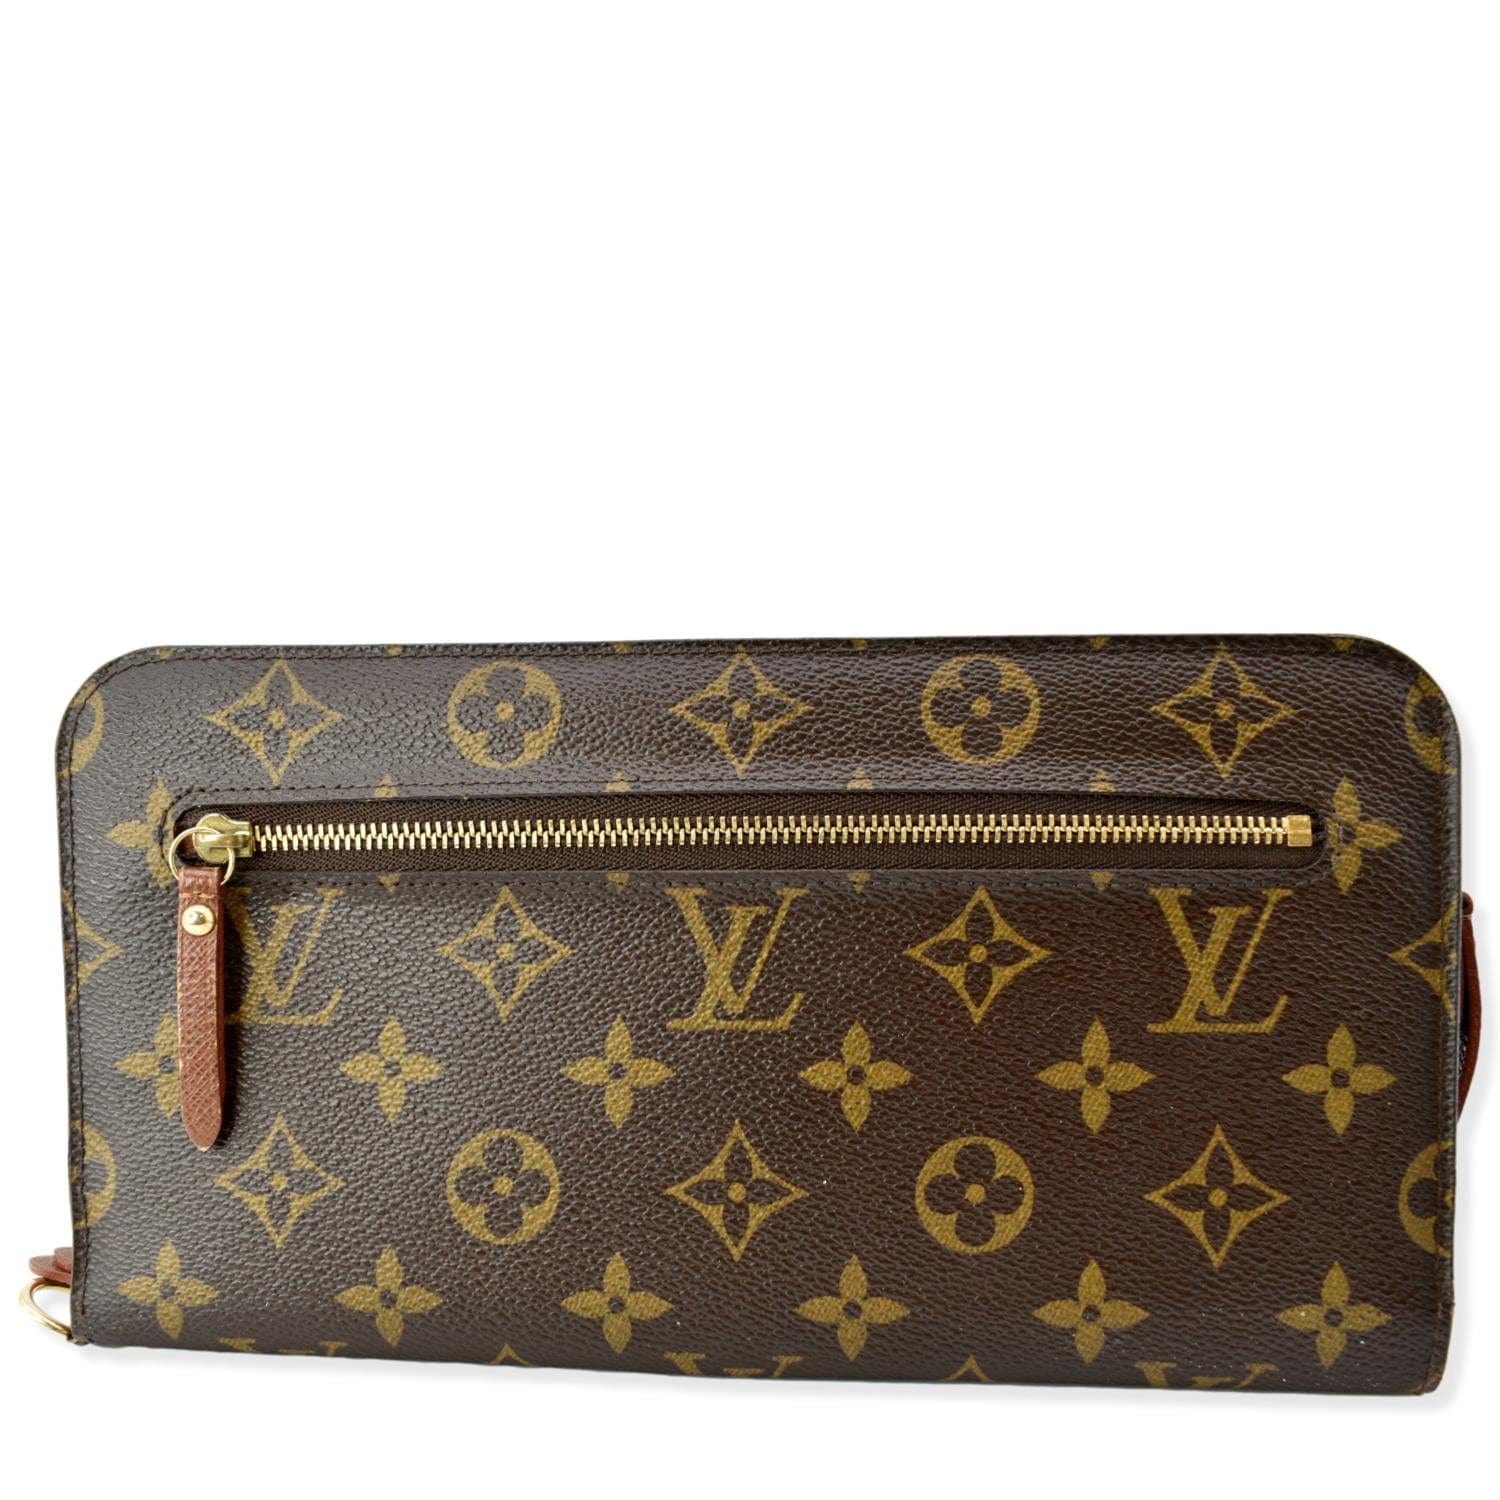 Louis Vuitton Daily Organiser, Questions & Answers